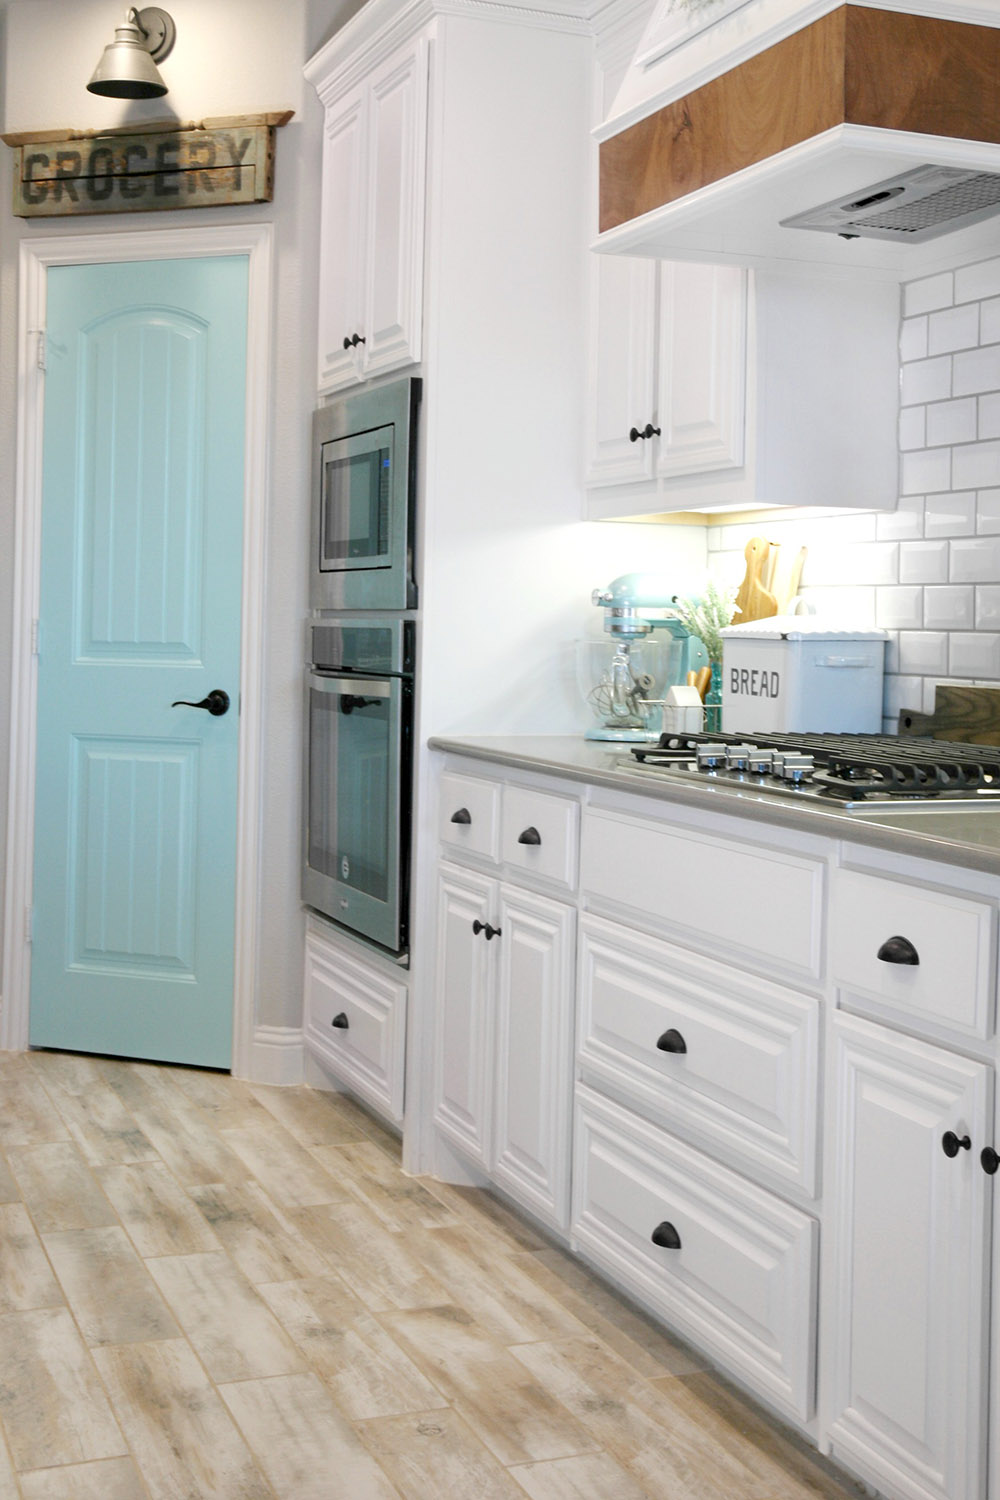 Kitchen with farmhouse theme, white cabinets and baby blue pantry door.